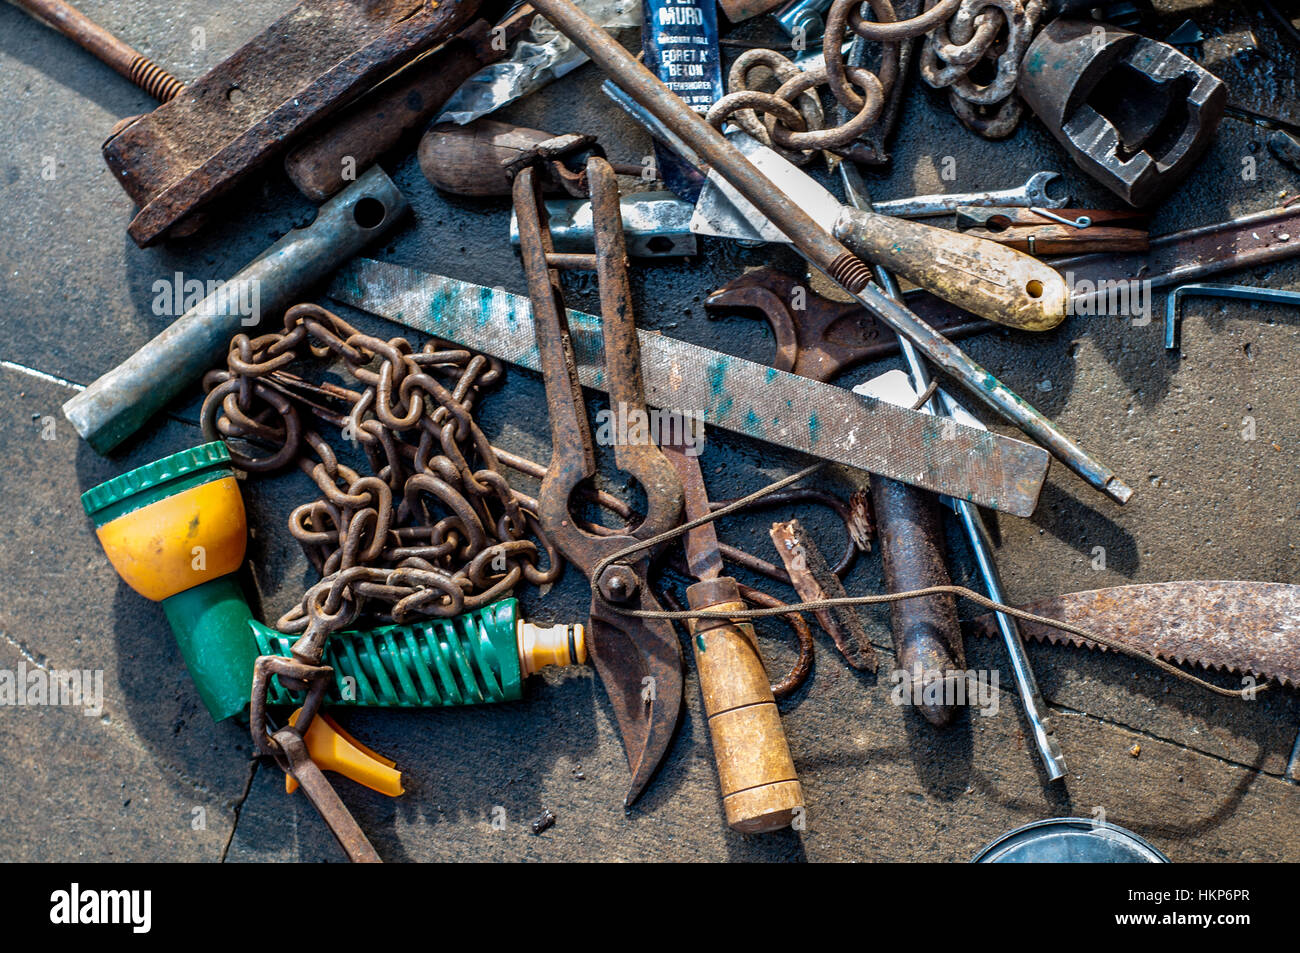 Old second-hand tools to sell on the street Stock Photo